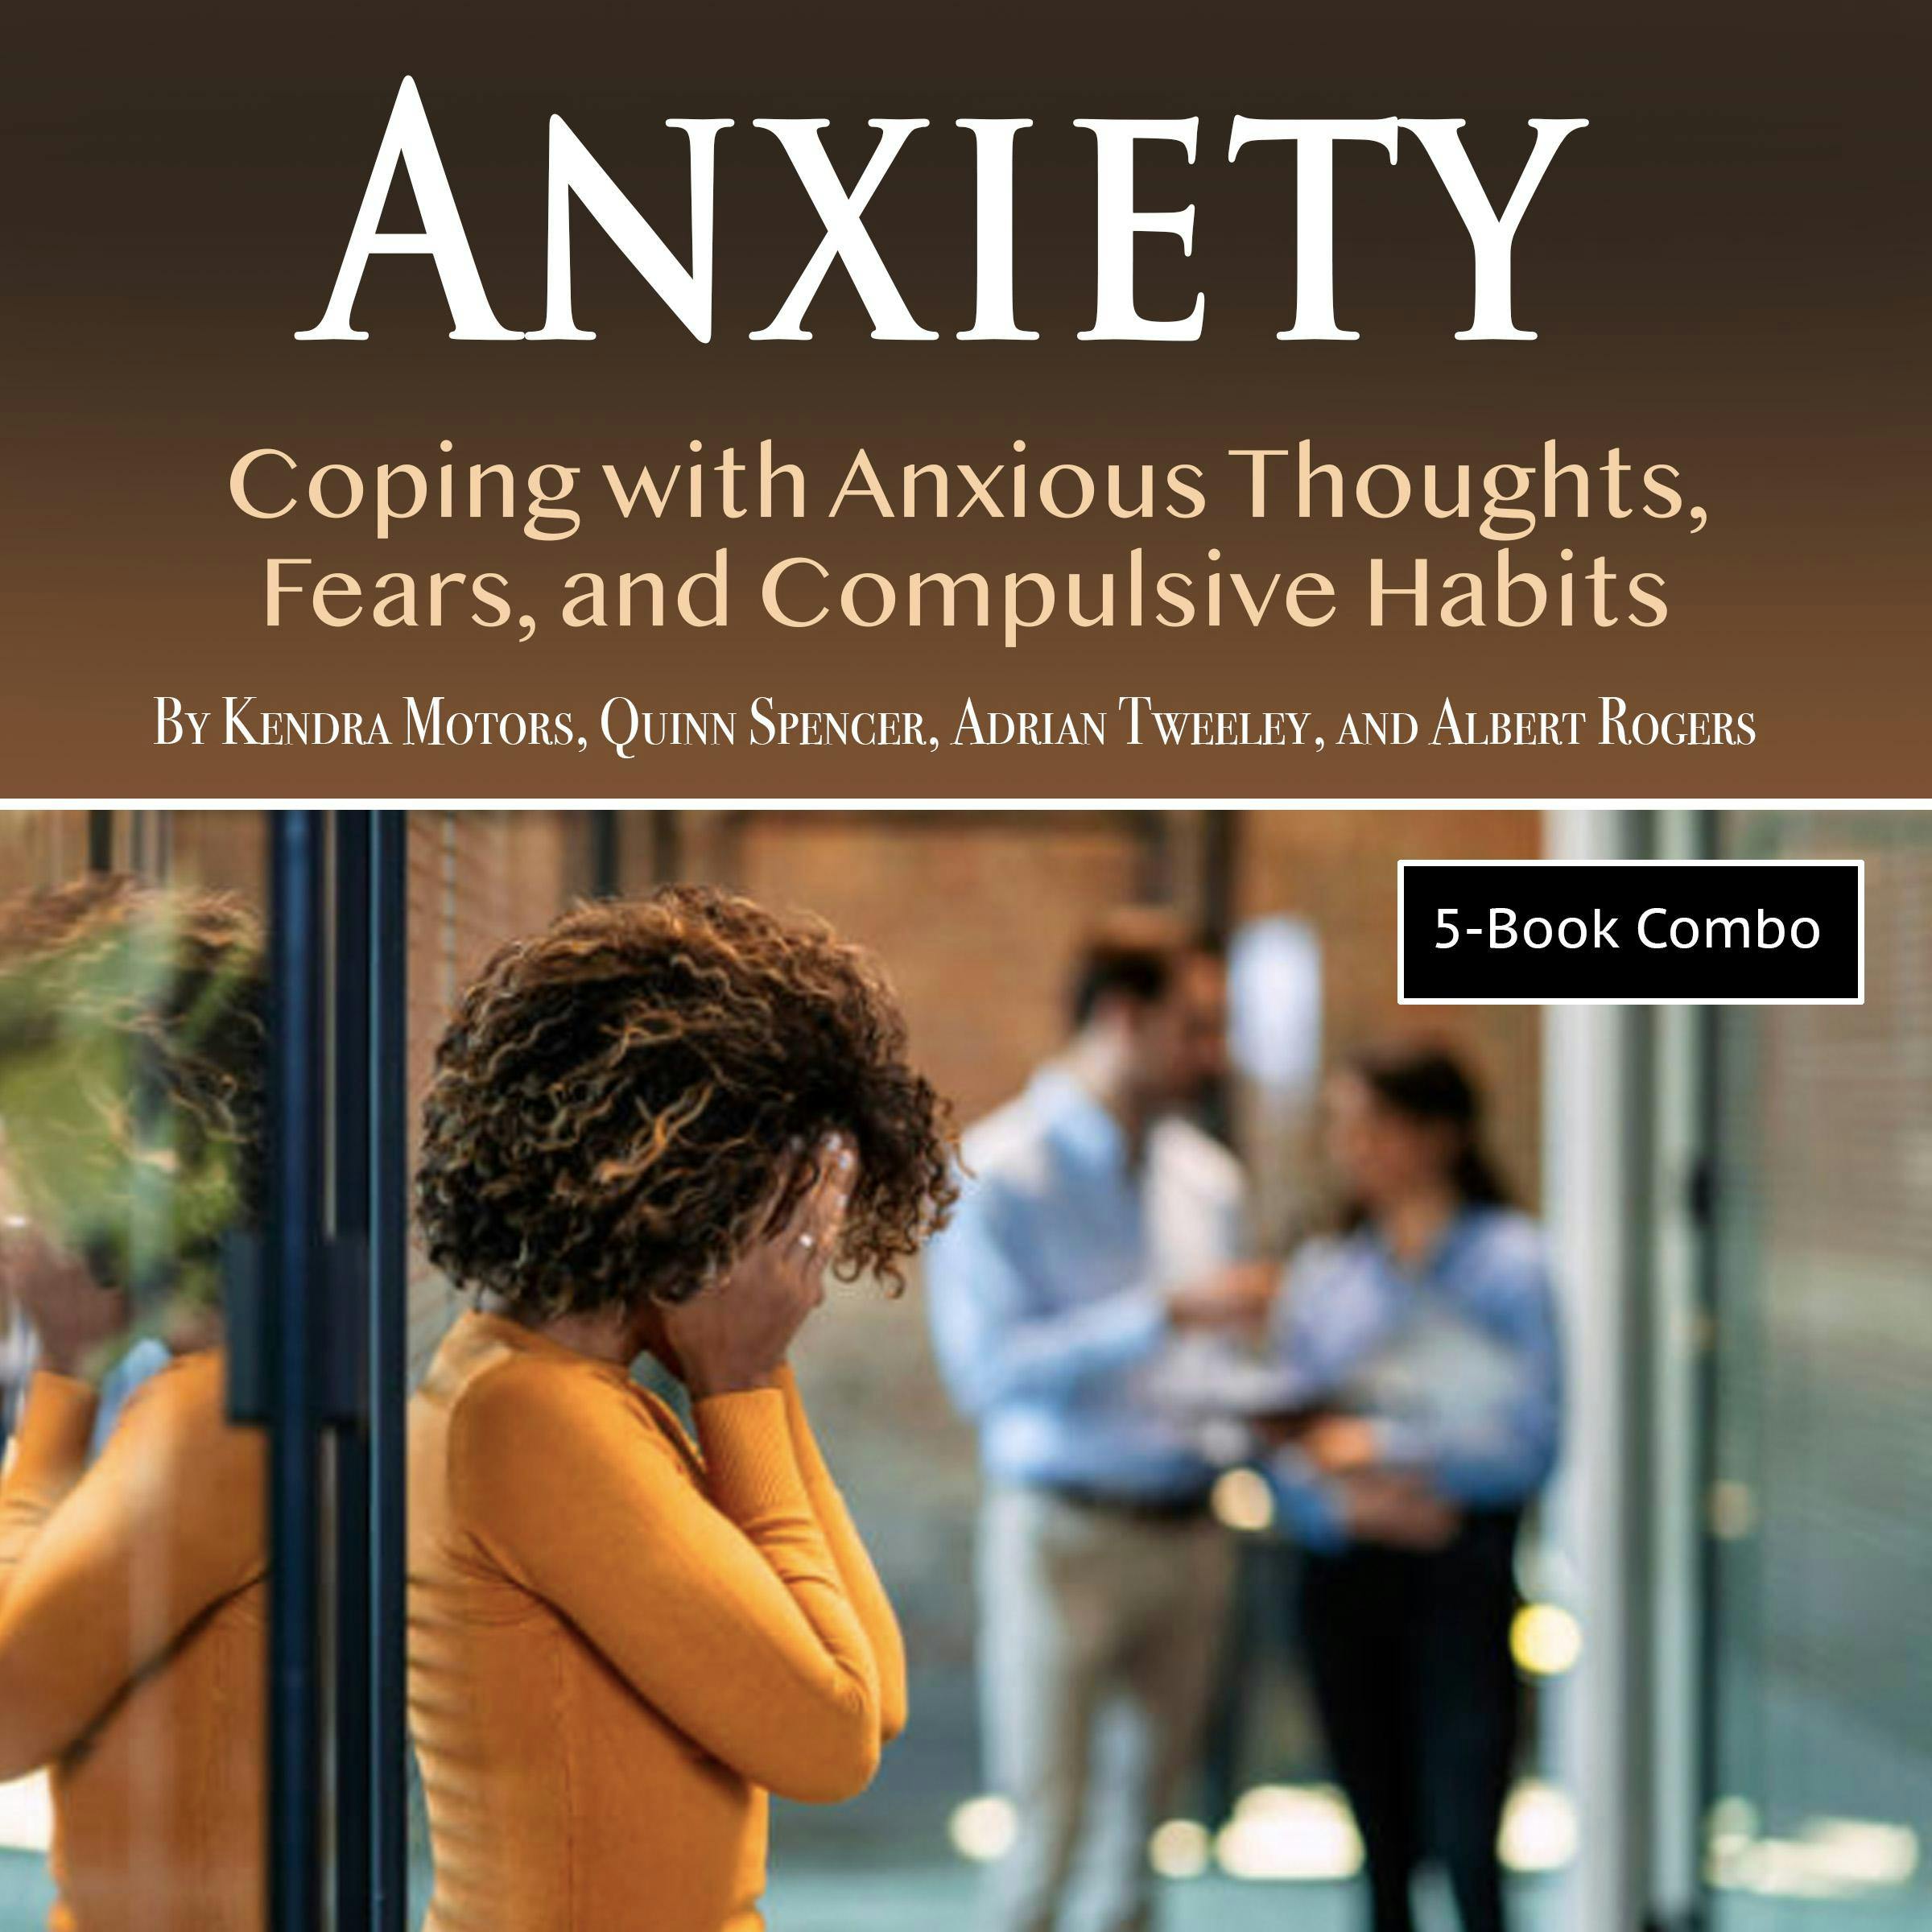 Anxiety: Coping with Anxious Thoughts, Fears, and Compulsive Habits - Albert Rogers, Kendra Motors, Adrian Tweeley, Quinn Spencer